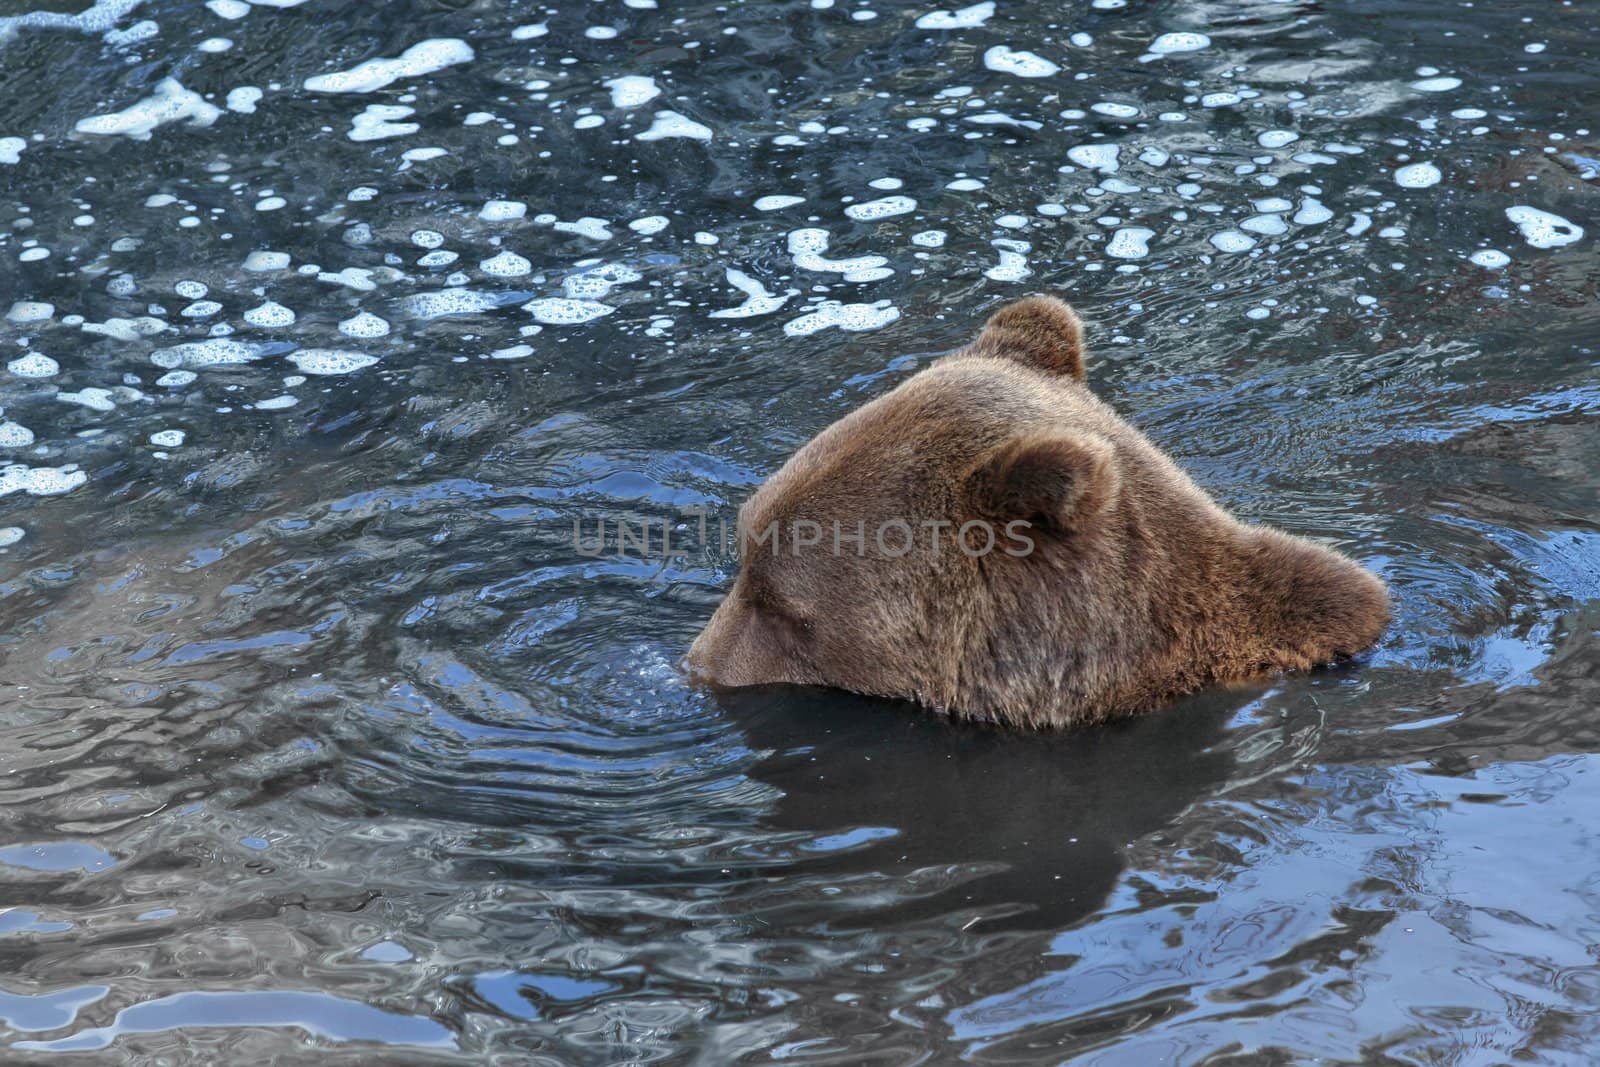 Playful bear doing water bubbles with his nose.